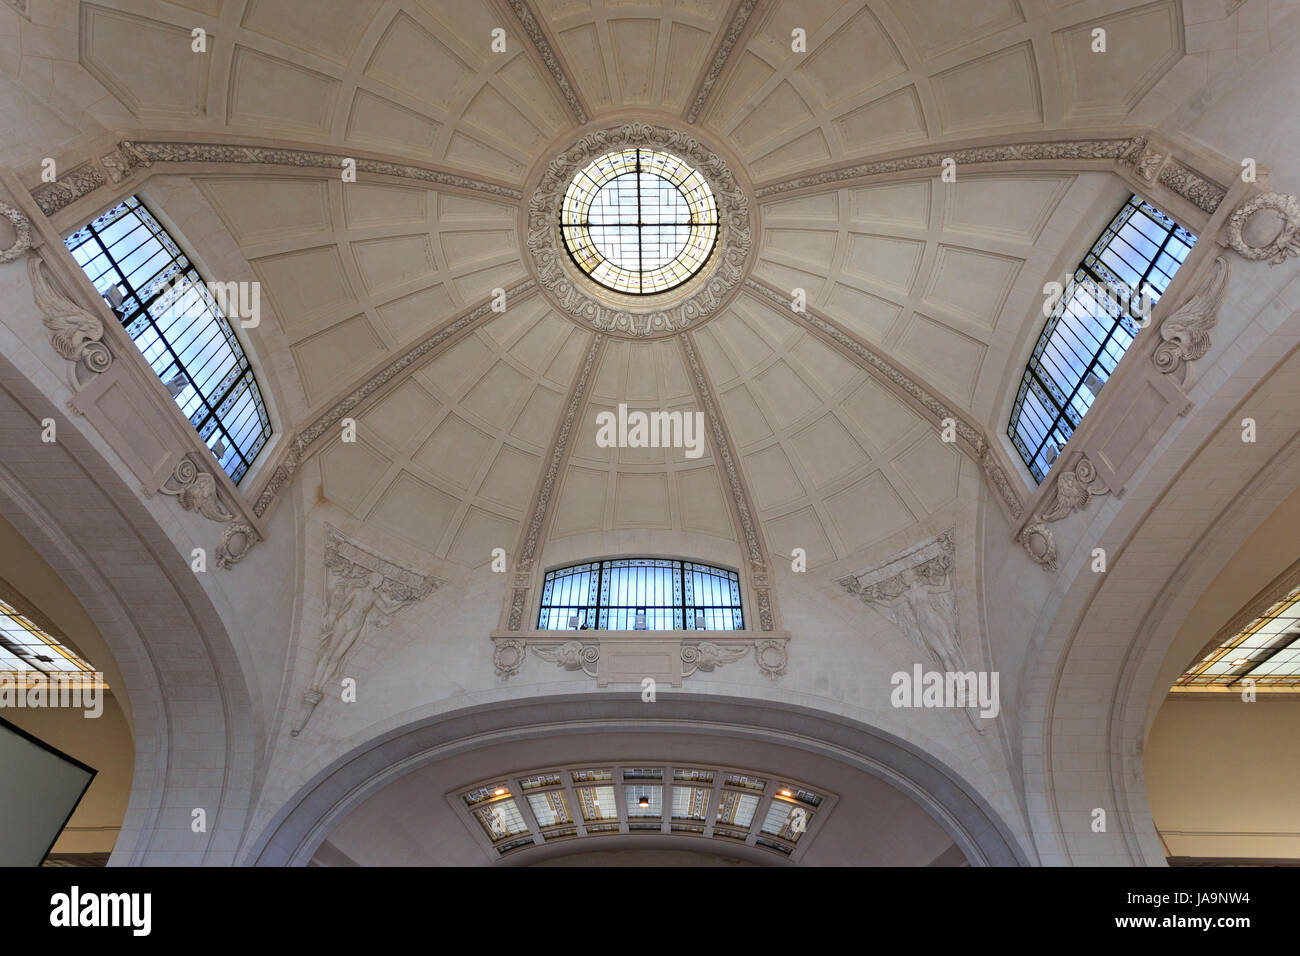 France, Haute Vienne, Limoges, Limoges Benedictins railway station, the dome Stock Photo